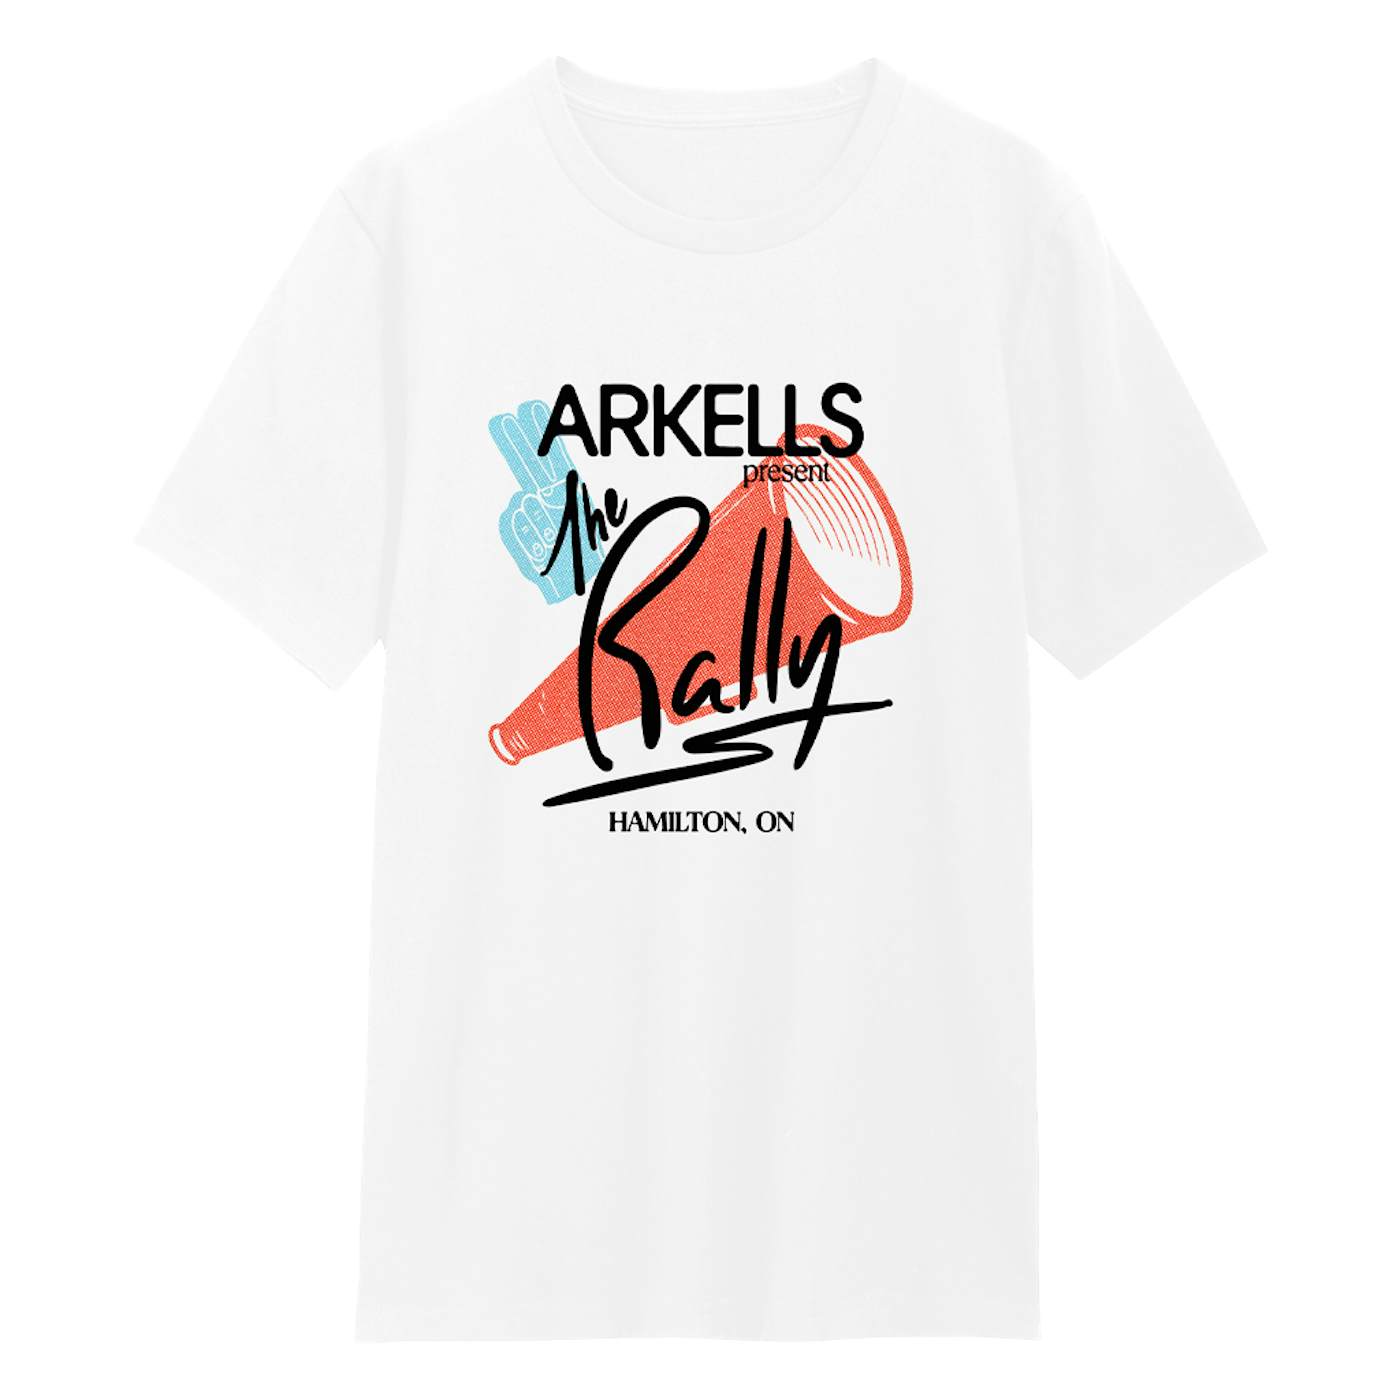 Arkells The Rally 2022 Event T-Shirt